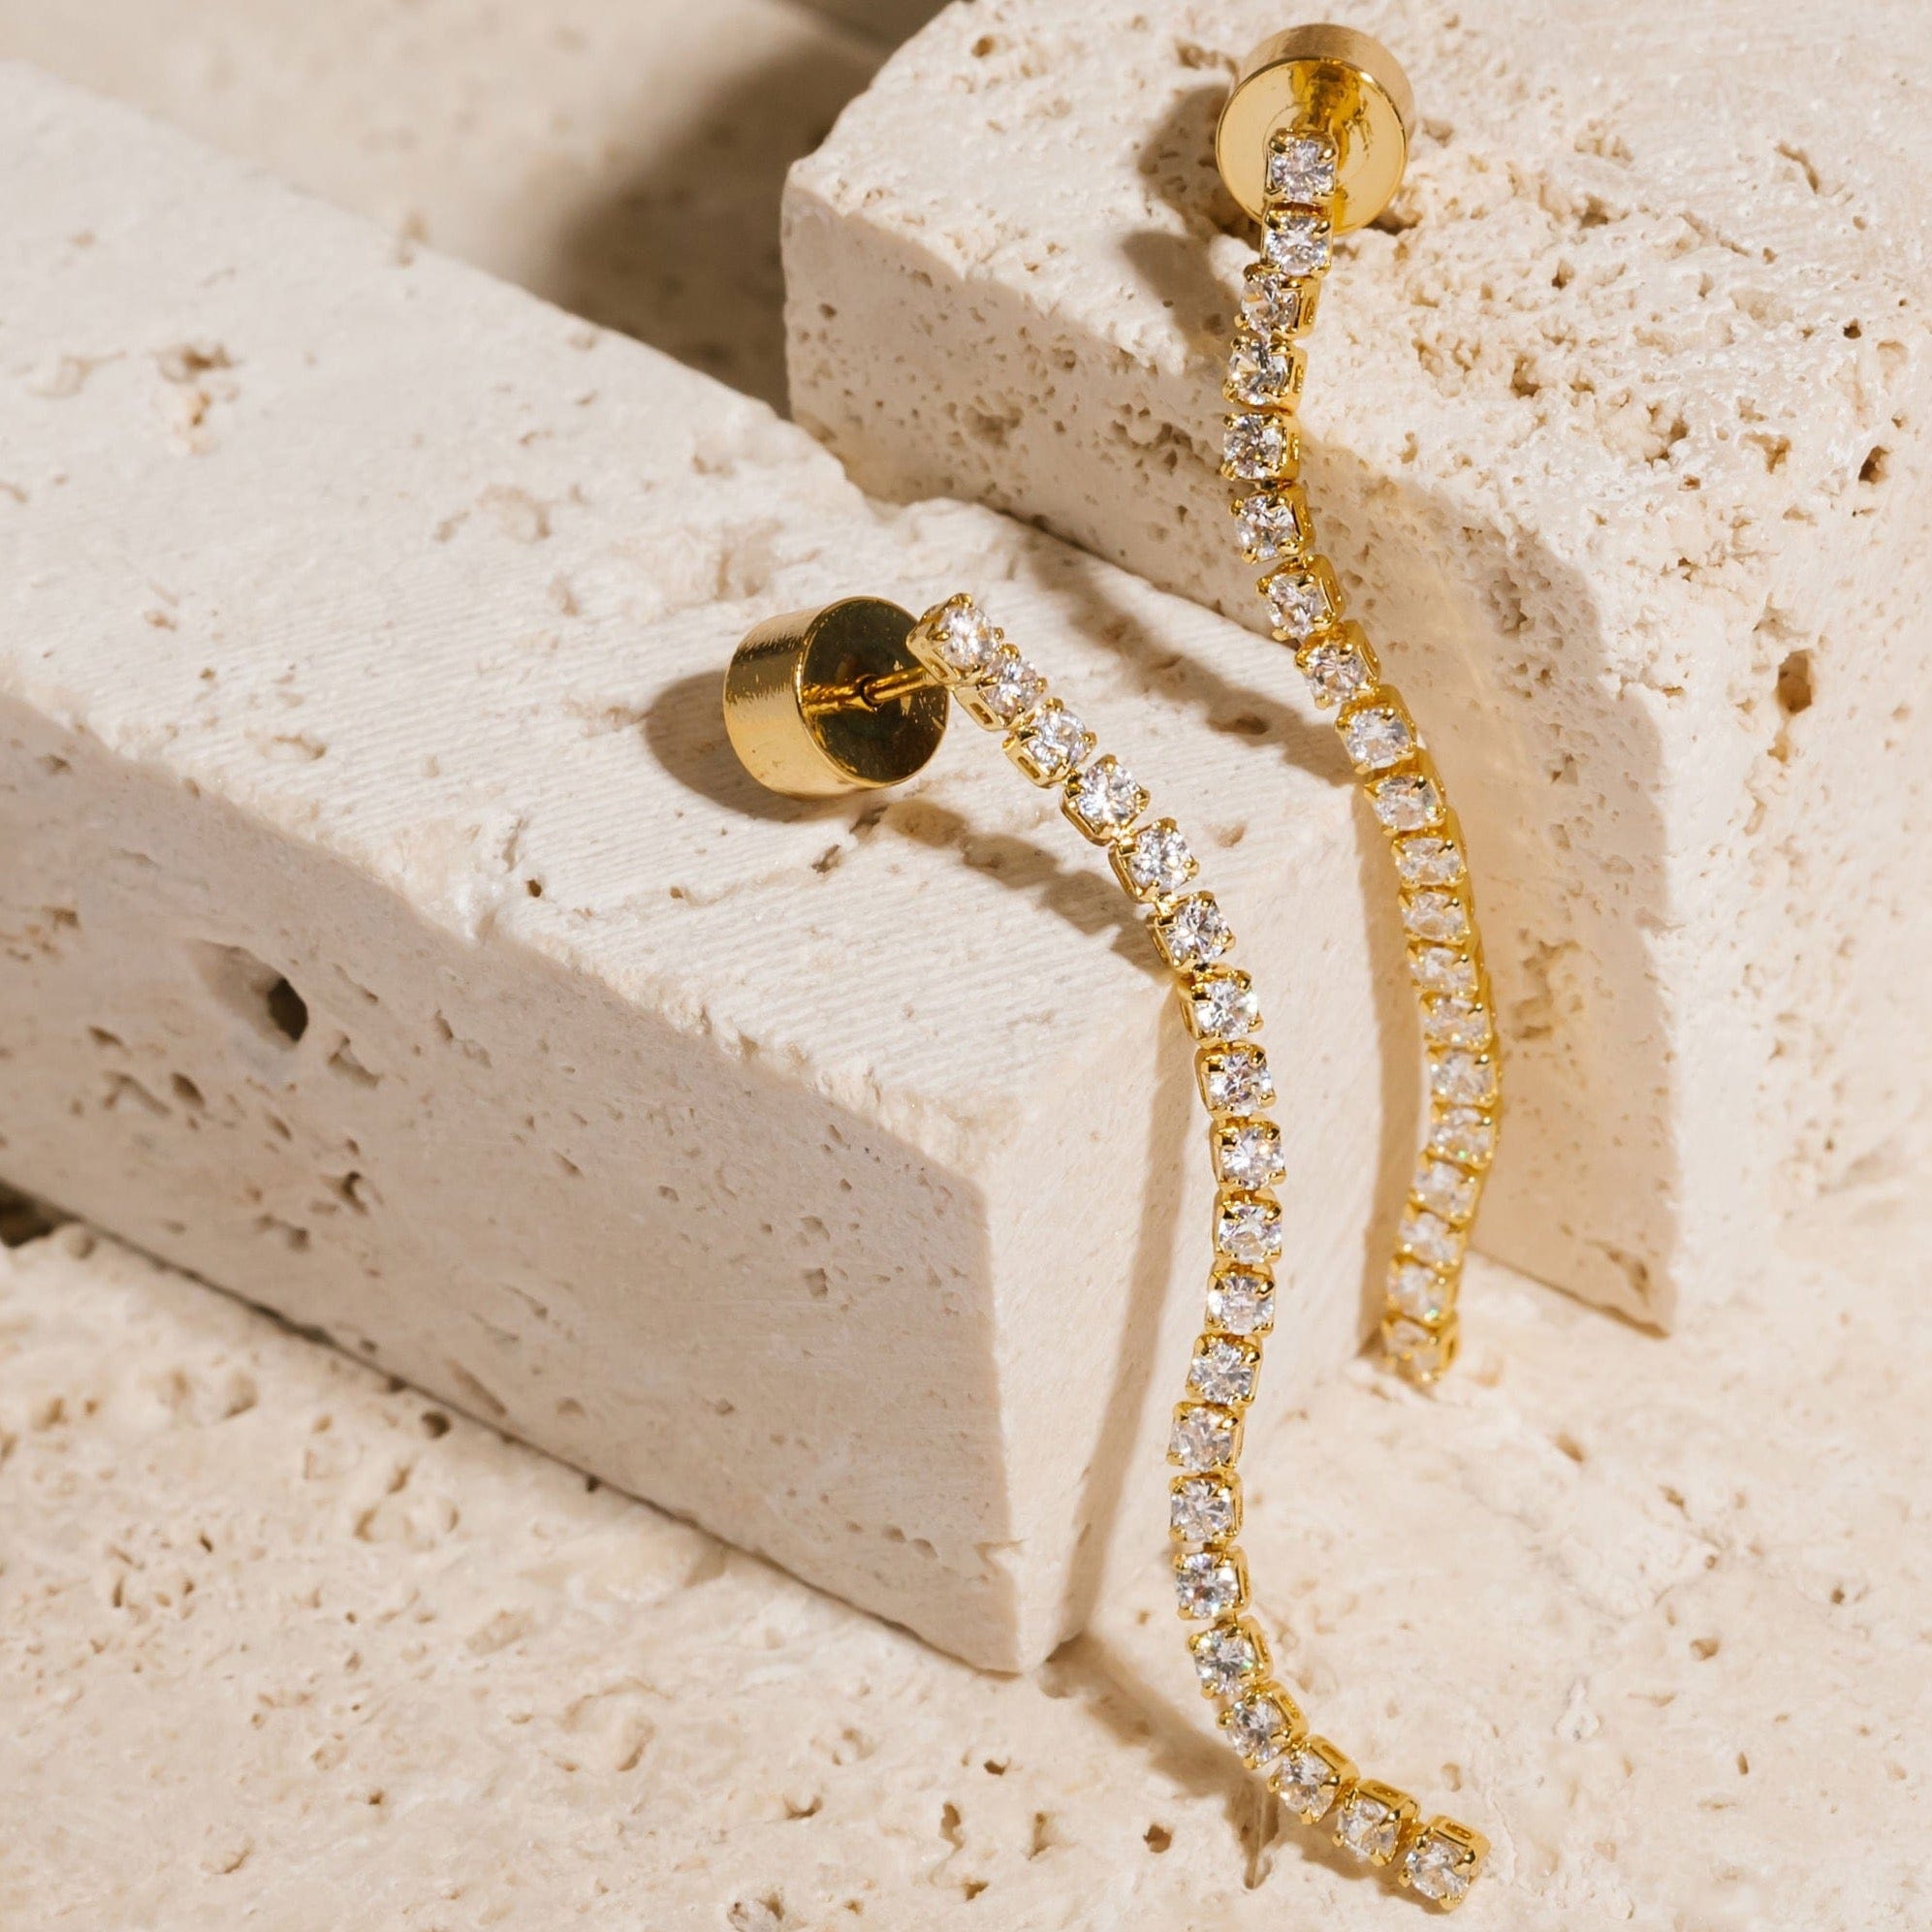 A pair of Scintilla Dangle Hoop earrings are set next to each other atop porous stone blocks, the cylindrical push-back closure shining golden behind the string of cubic zirconia accents. 